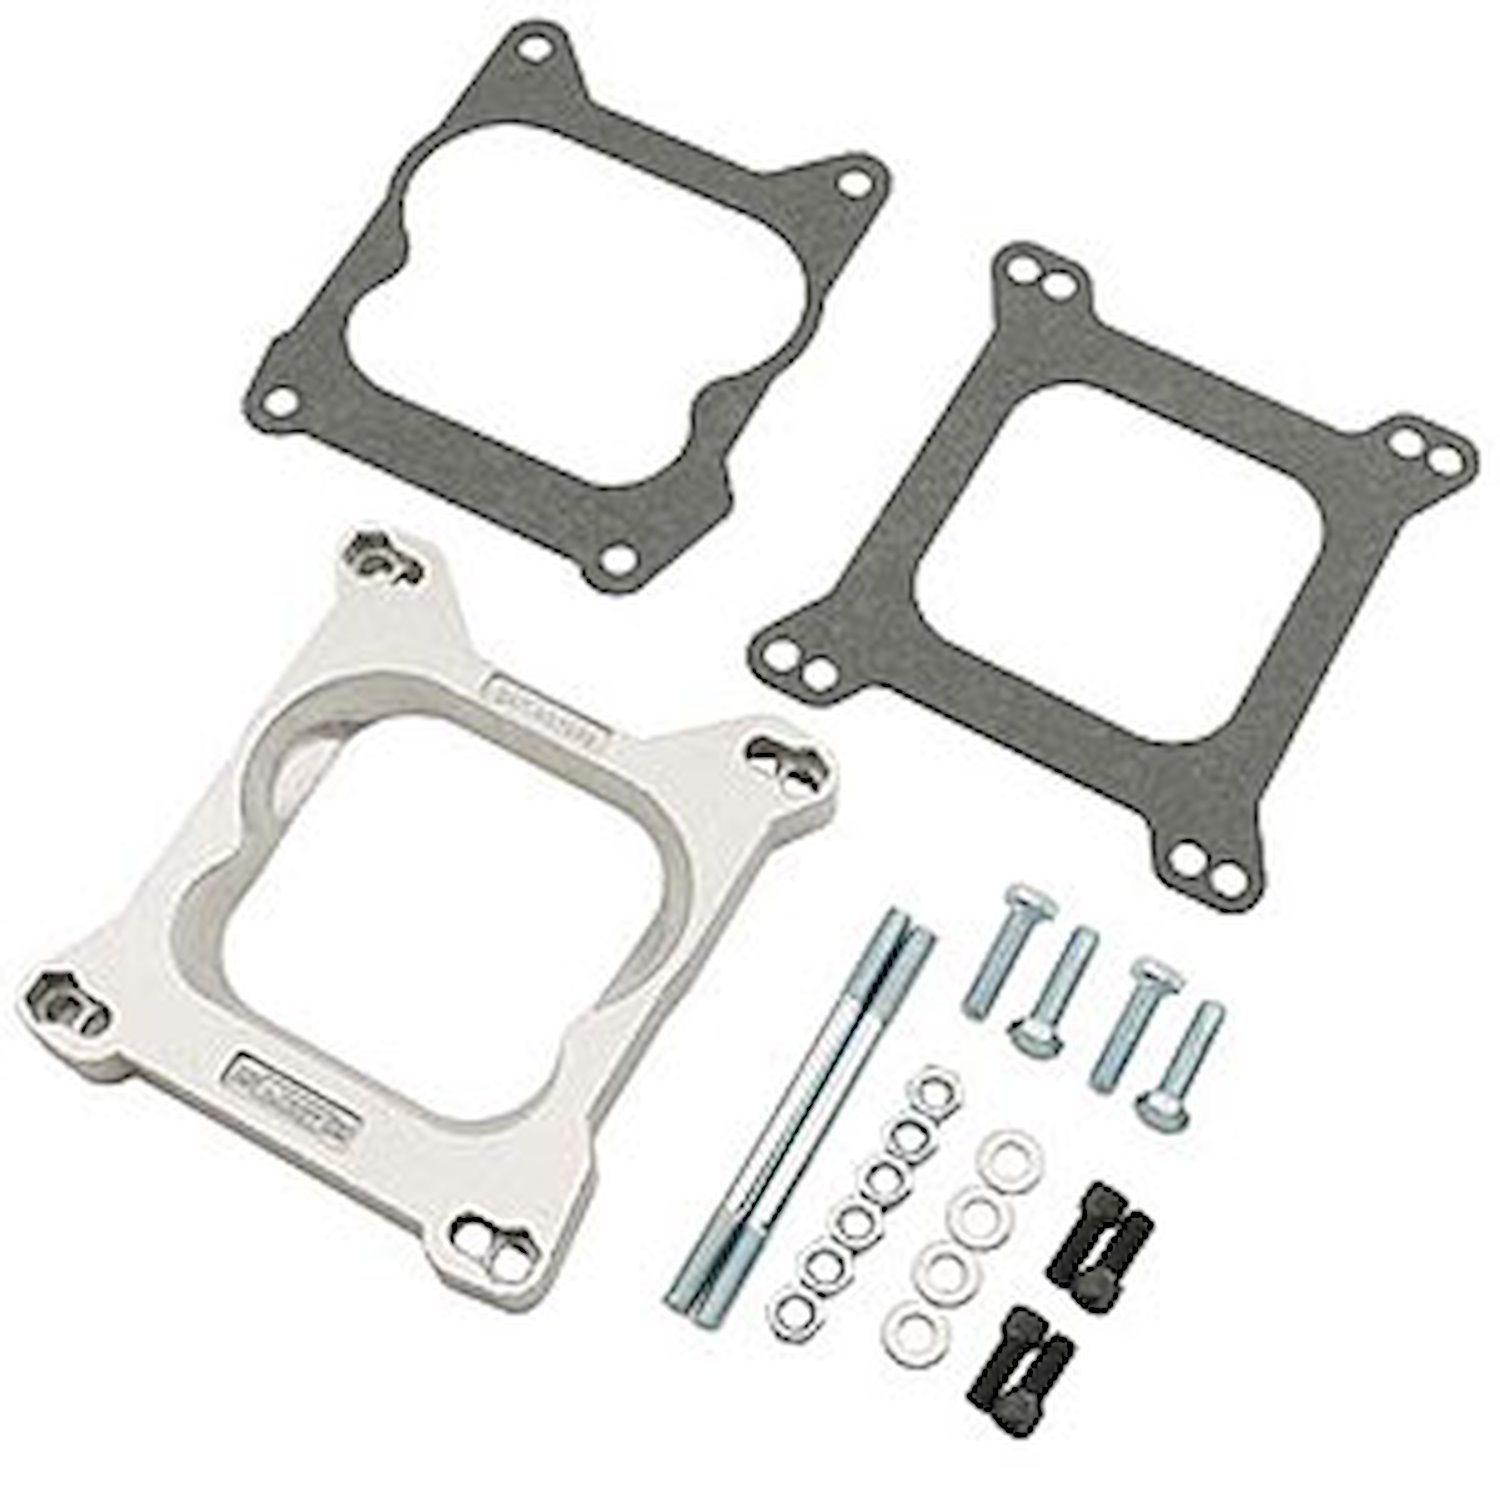 Carburetor Adapter Kit 4-bbl carb to 4-bbl manifold except Holley 450 carbs